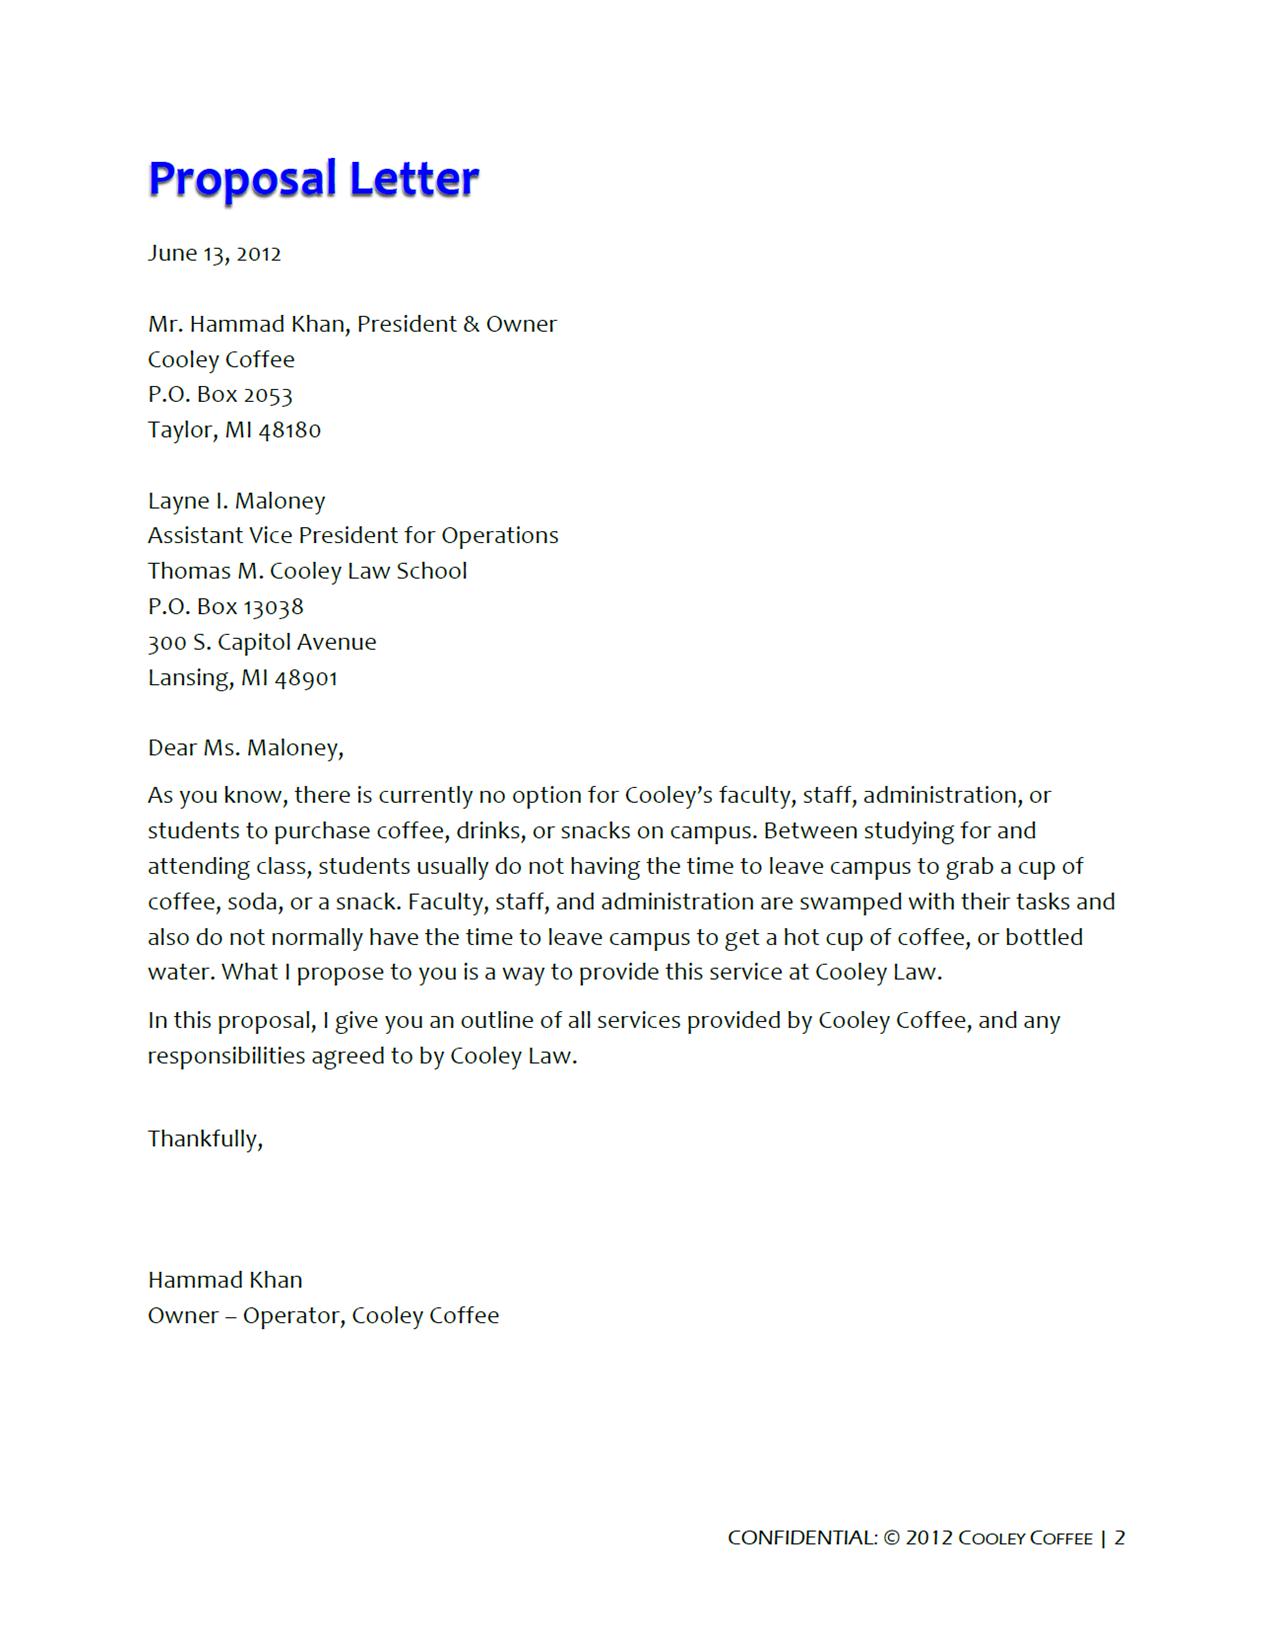 introduction sample business proposal letter for services